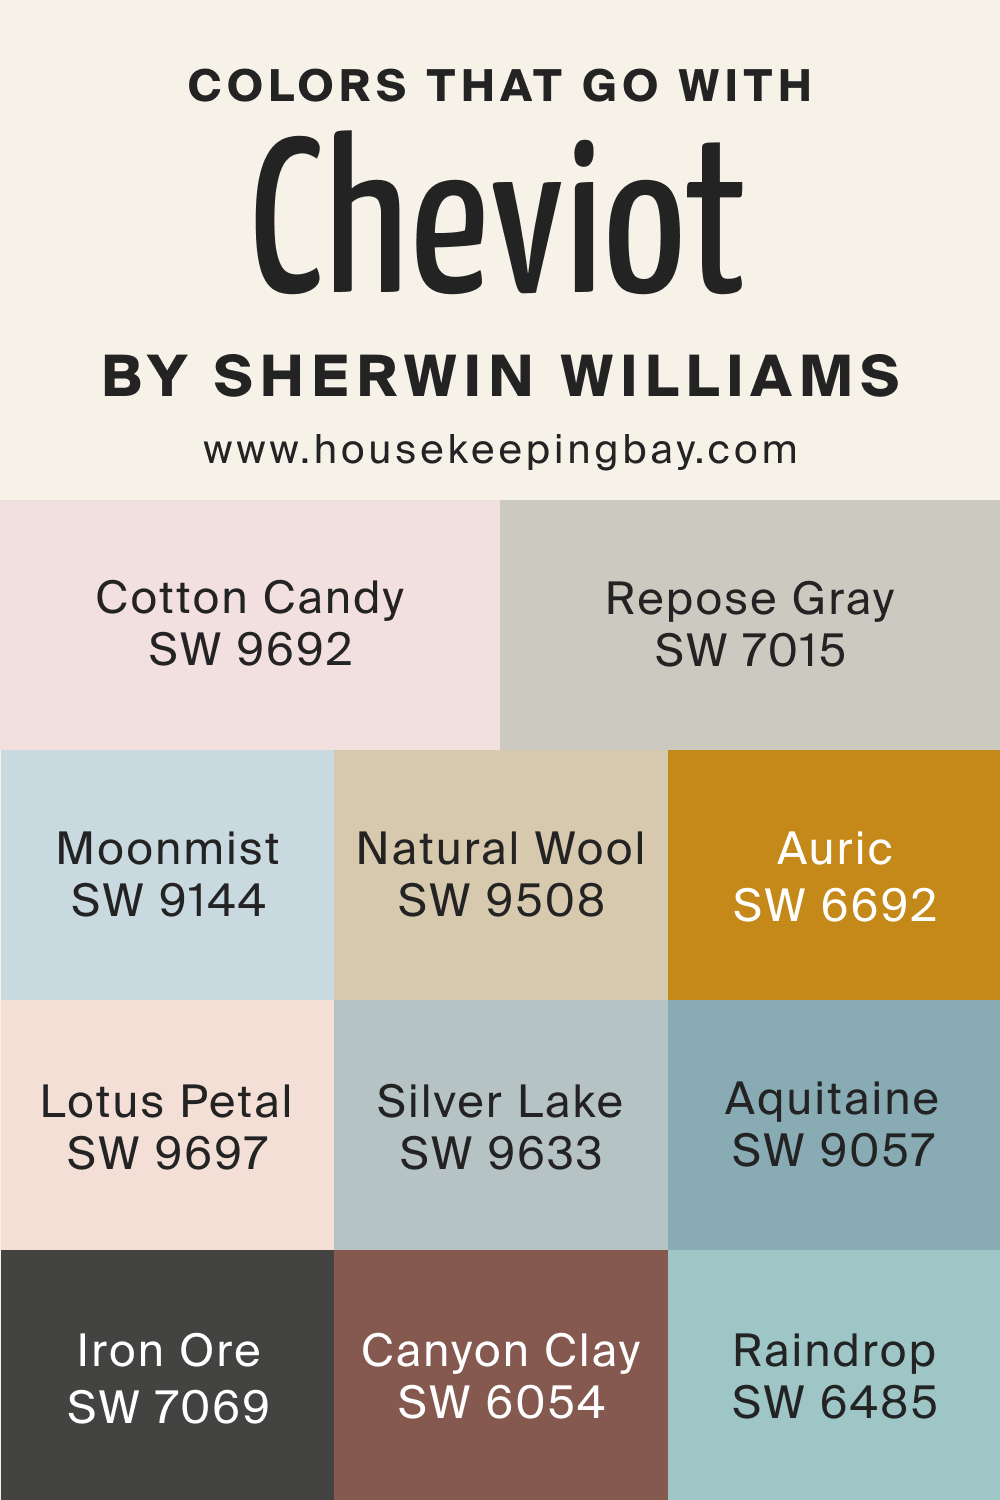 Colors that goes with SW 9503 Cheviot by Sherwin Williams